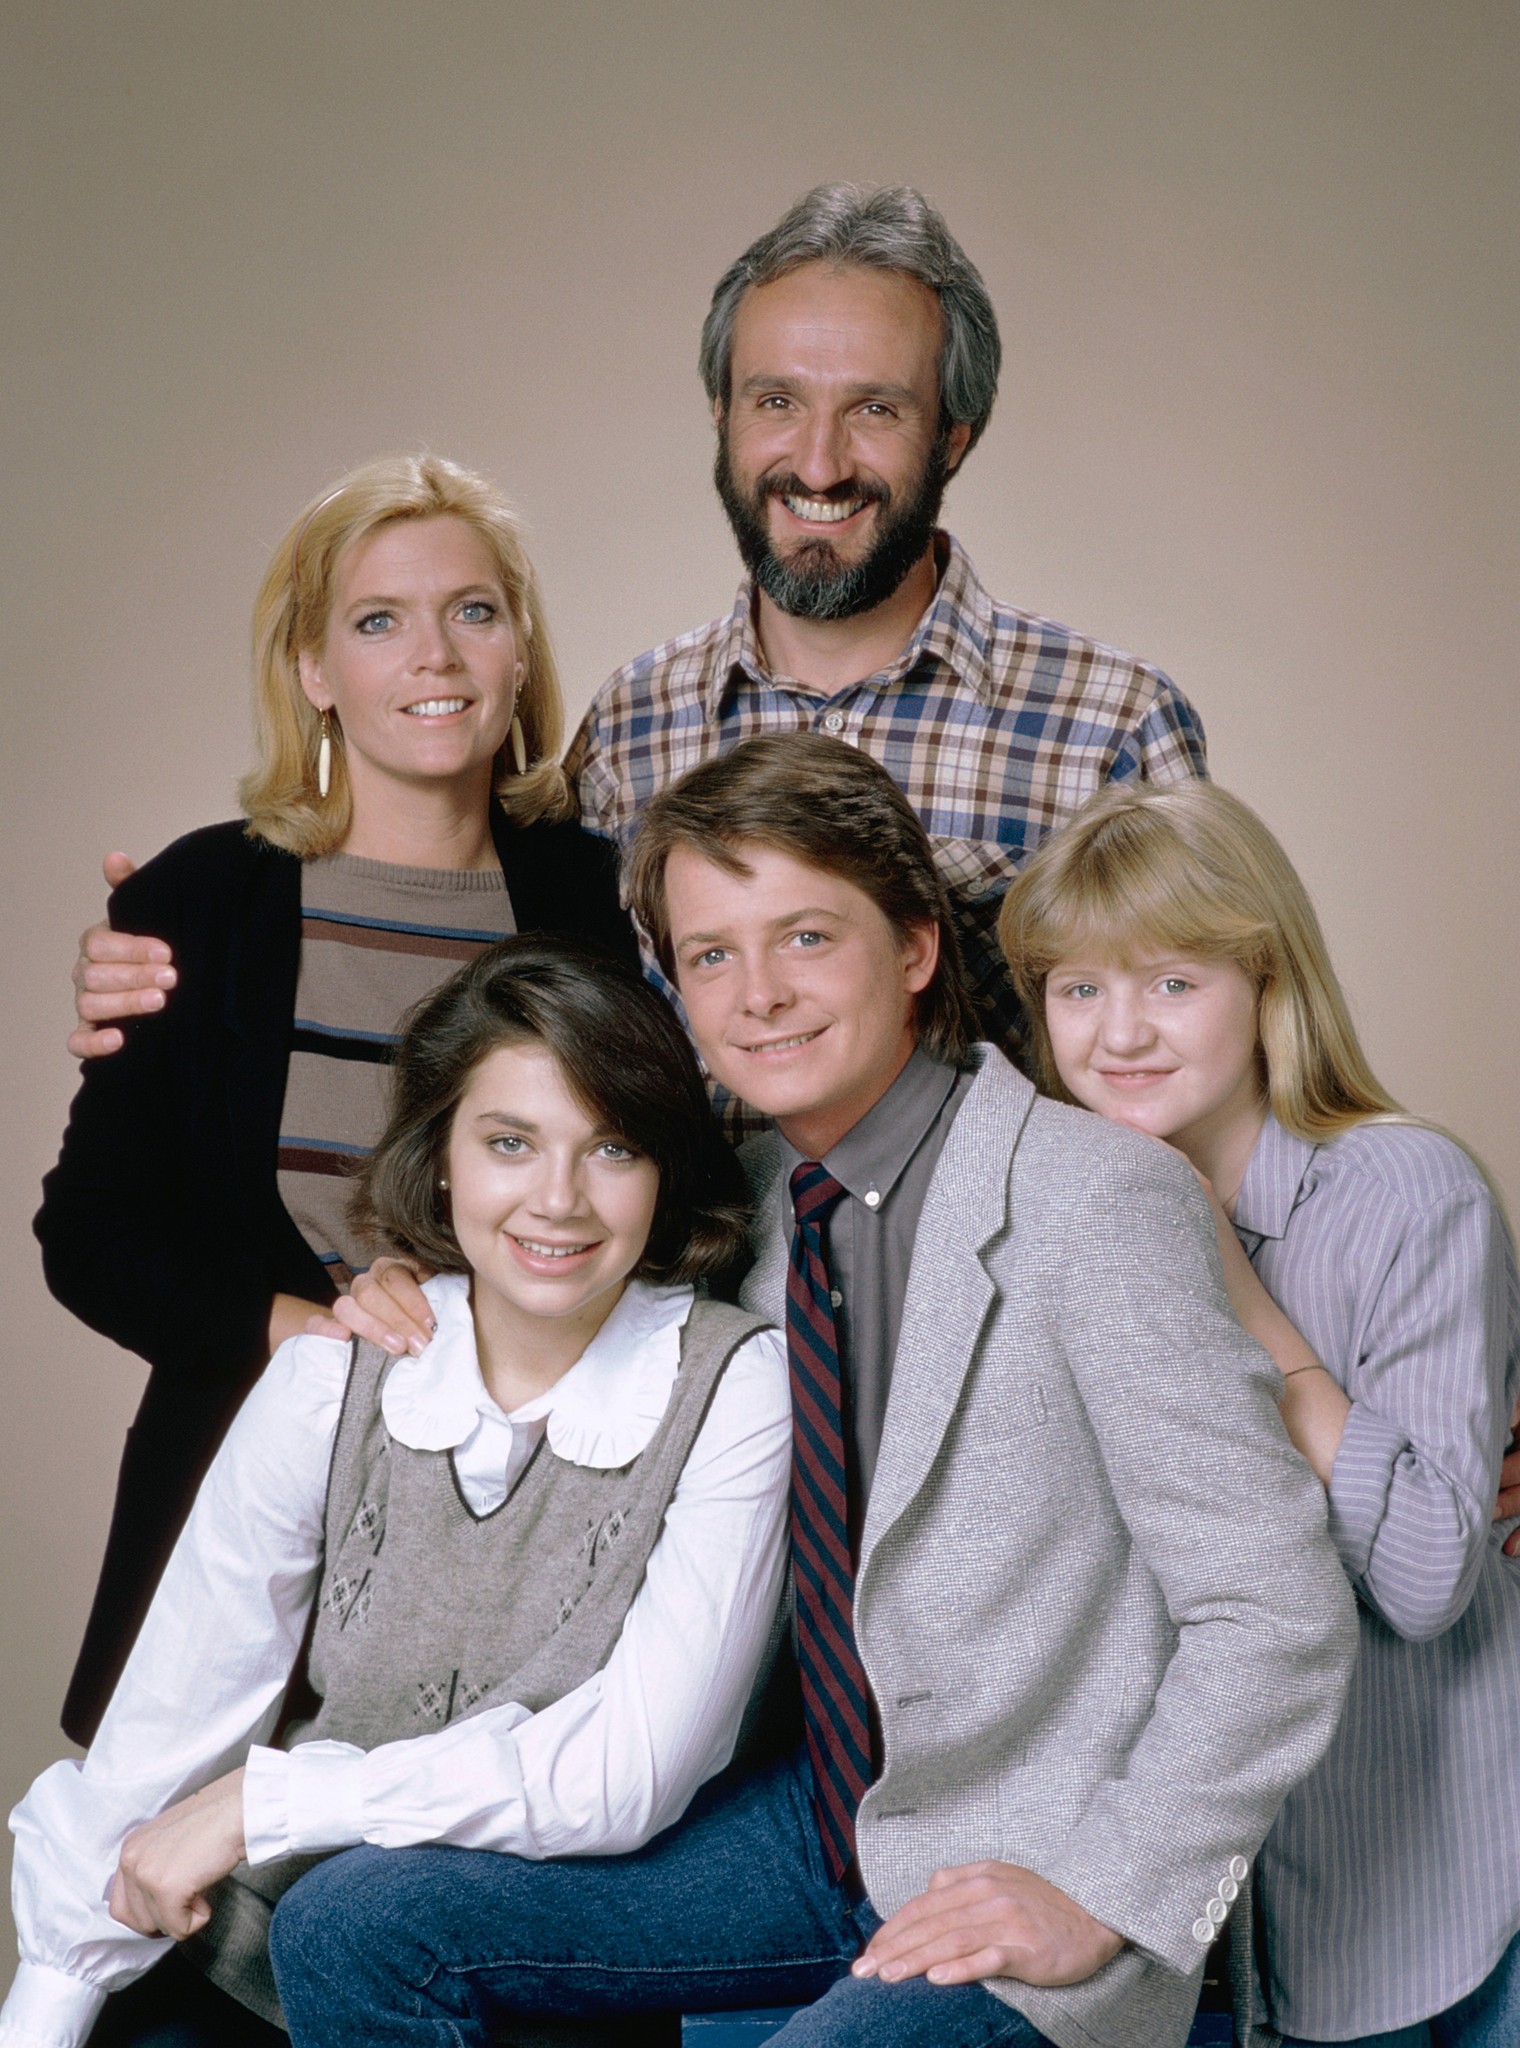 Still of Michael J. Fox, Justine Bateman, Meredith Baxter, Tina Yothers and Michael Gross in Family Ties (1982)